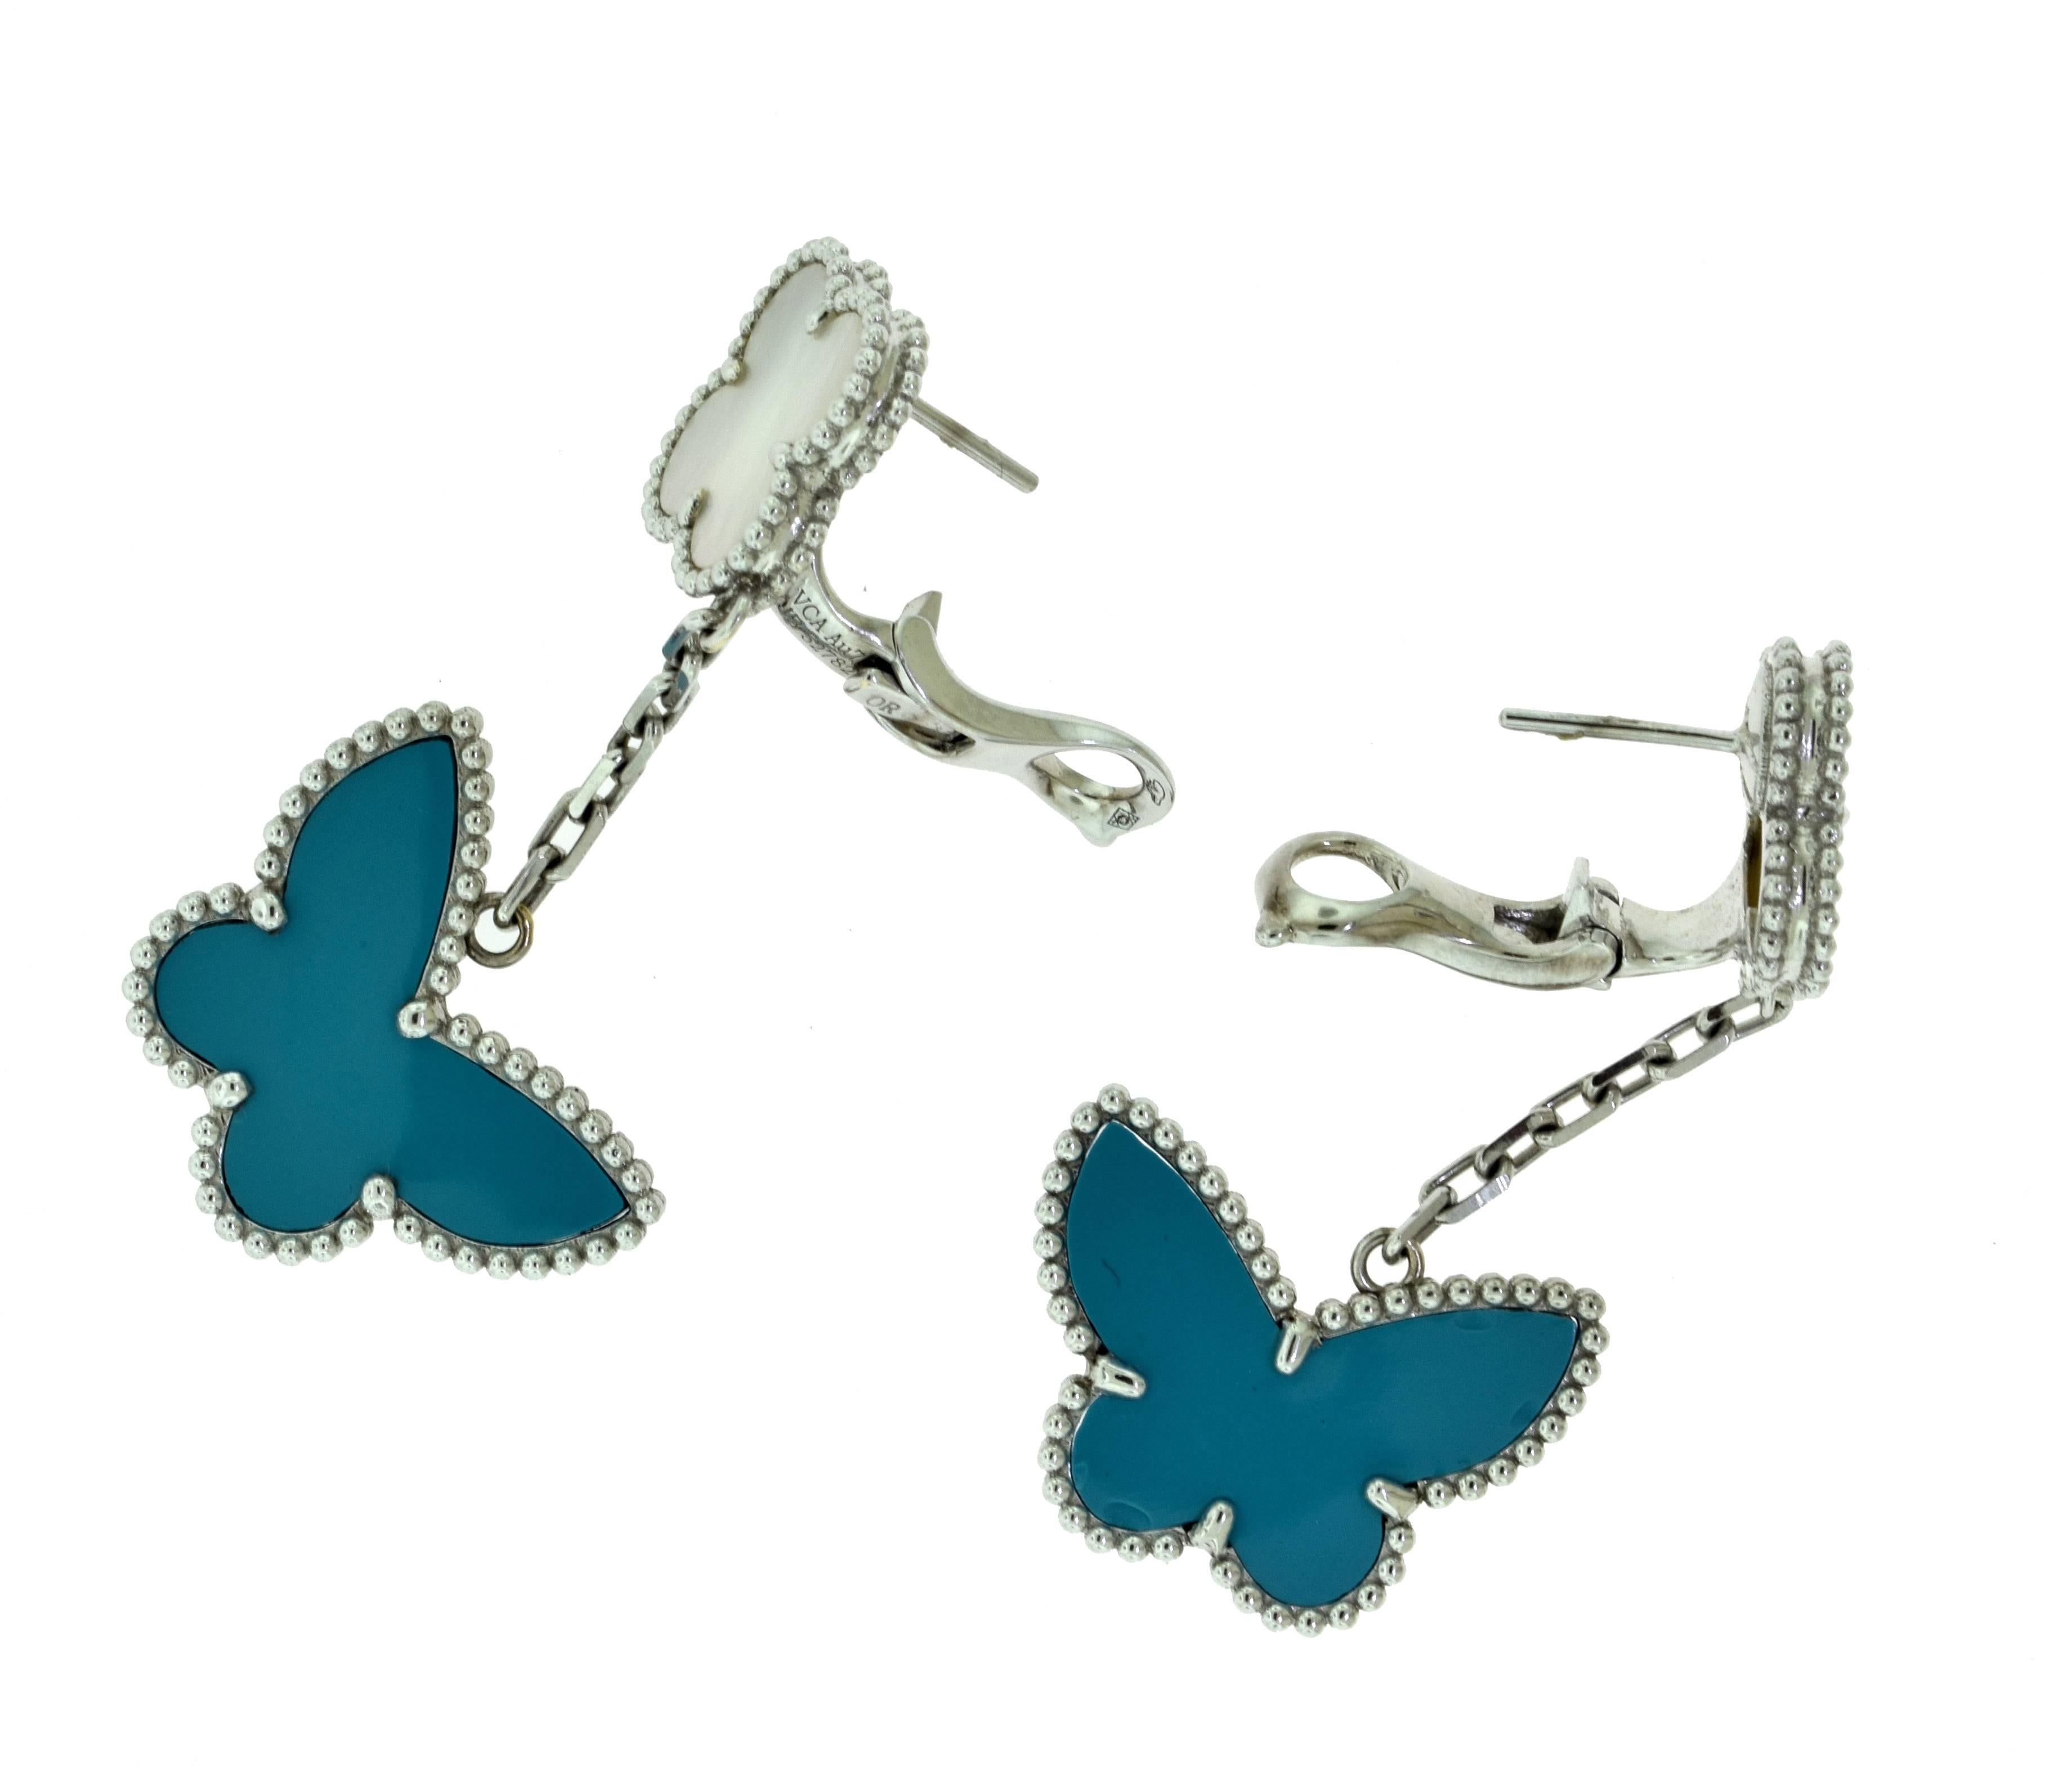 Designer: Van Cleef & Arpels
Collection: Lucky Alhambra
Metal: White Gold
Metal Purity: 18k
Stones: Turquoise ; Mother of Pearl
Earring Length: 1.8 inches
Butterfly Motif Length: 1.5 inches
Clover Motif Length: 0.5 inches
Total Item Weight (g):